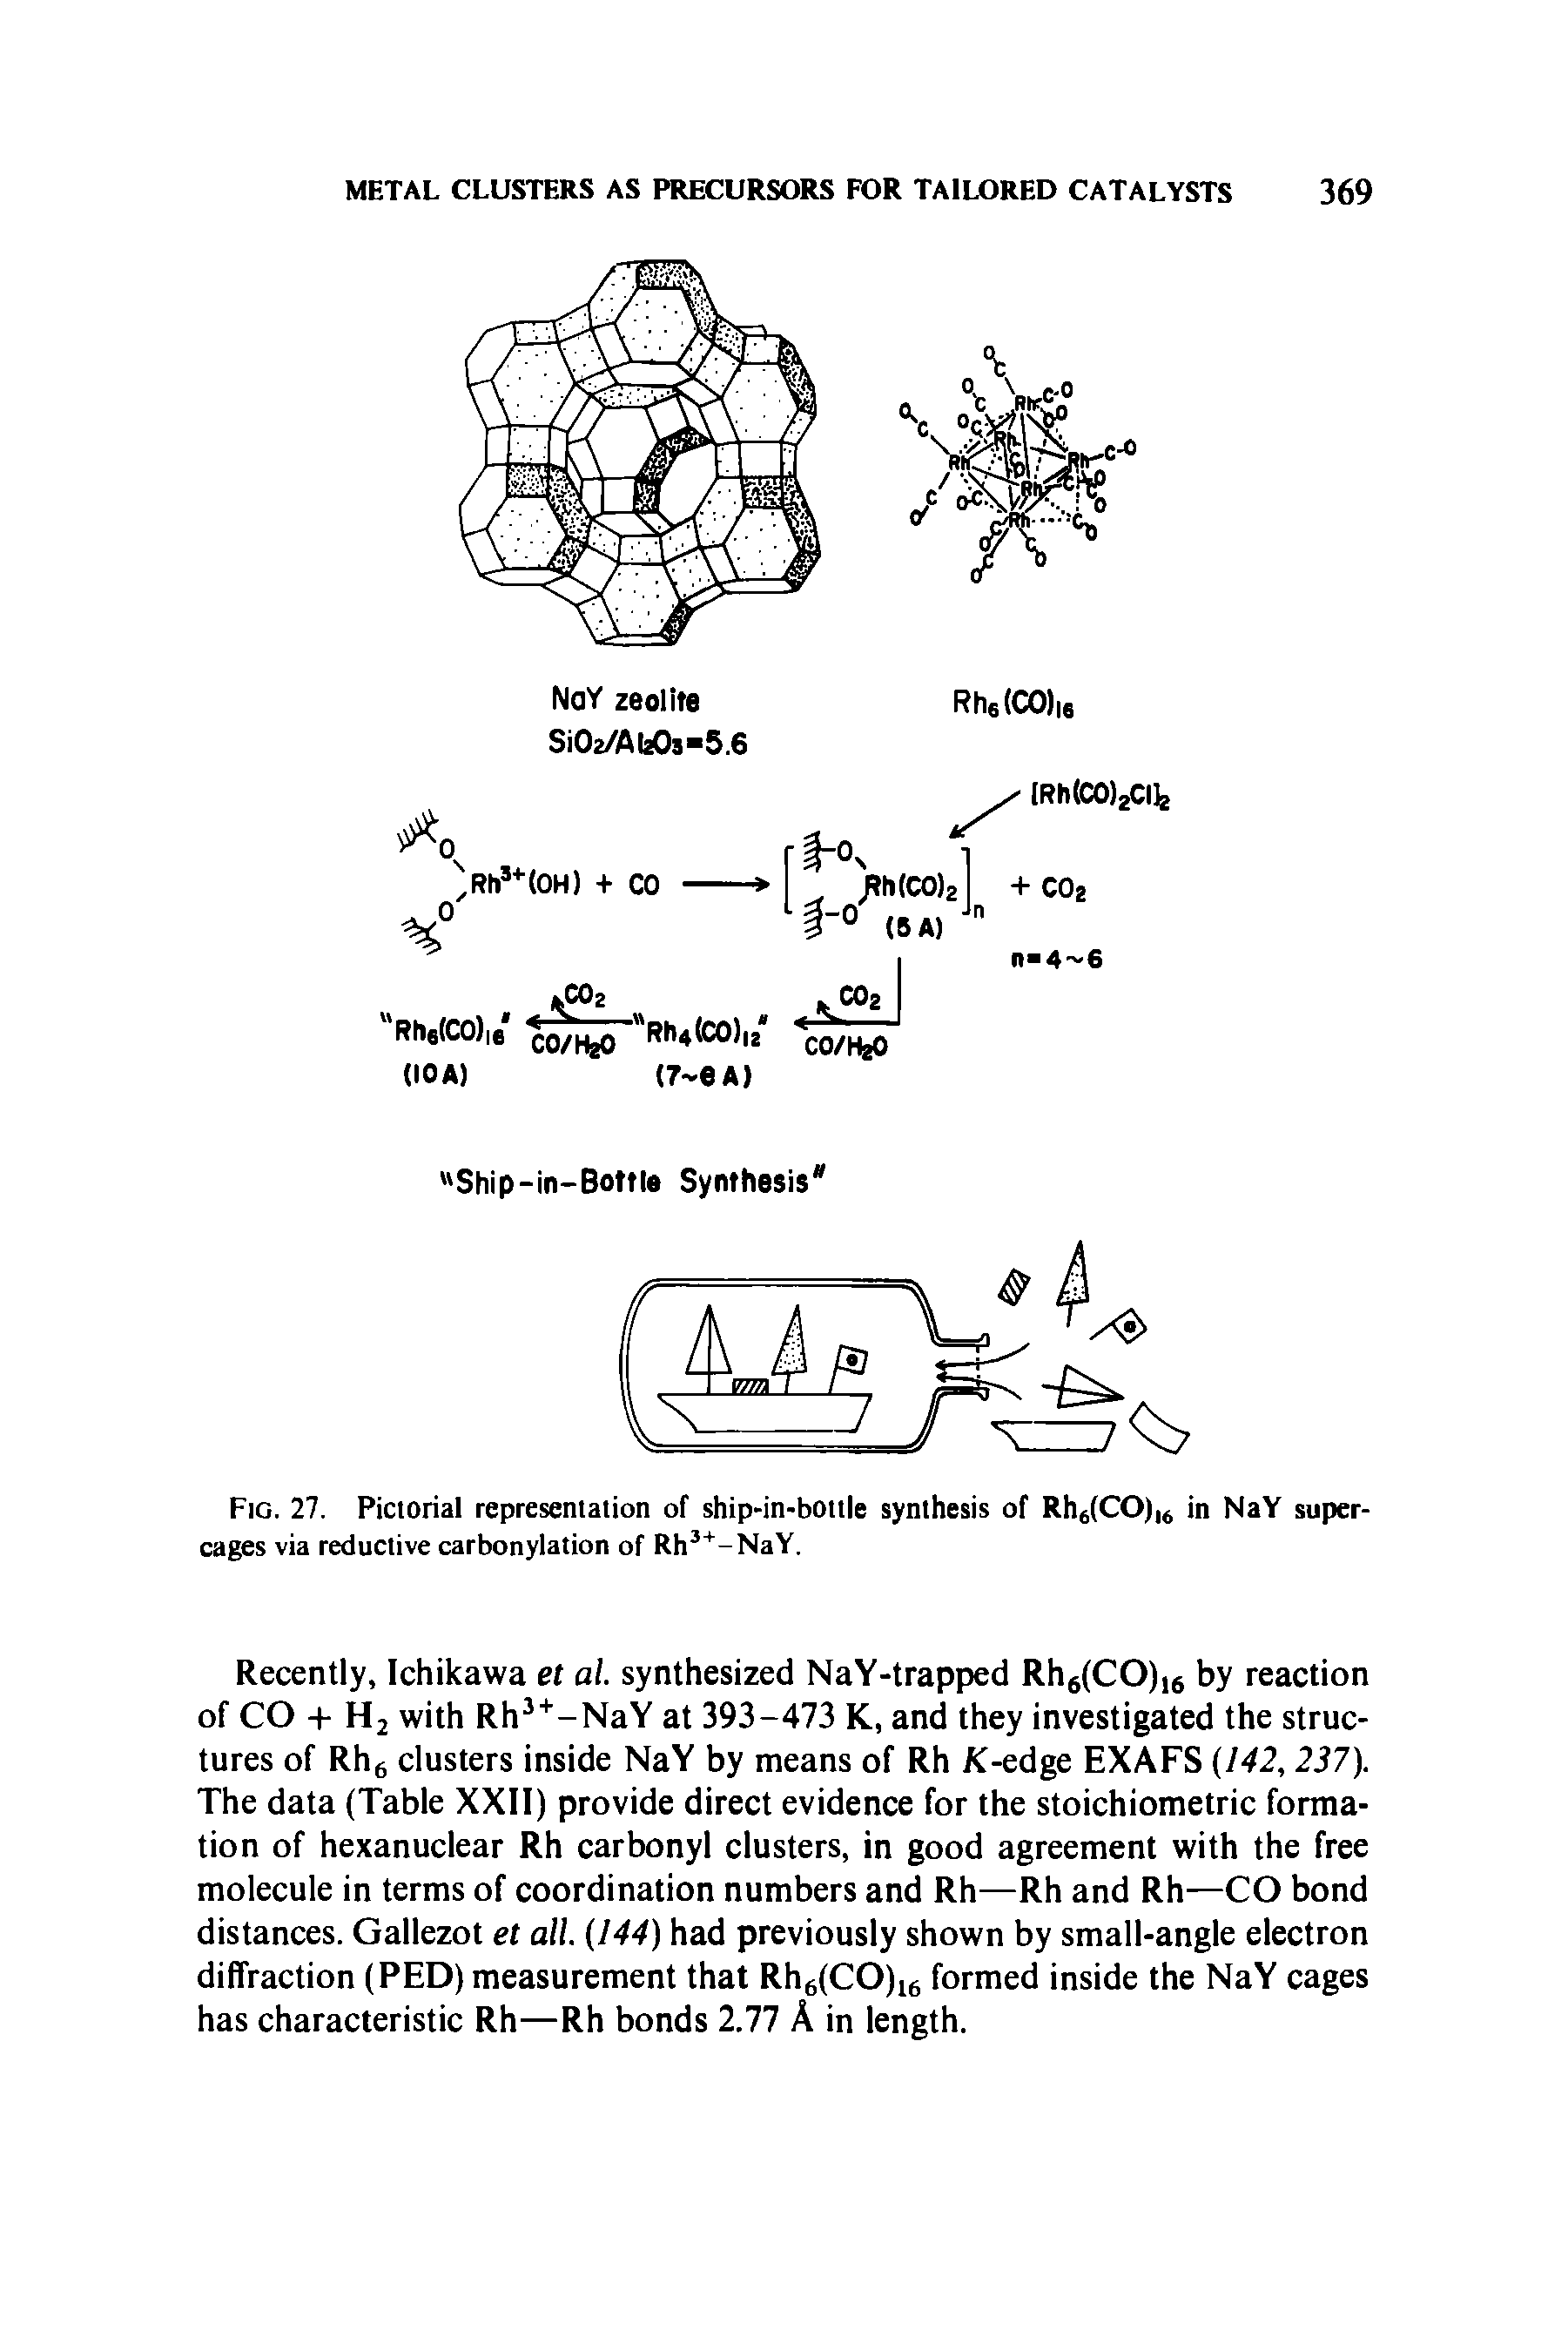 Fig. 27. Pictorial representation of ship-in-bottle synthesis of RhelCO), in NaY supercages via reductive carbonylation of Rh -NaY.